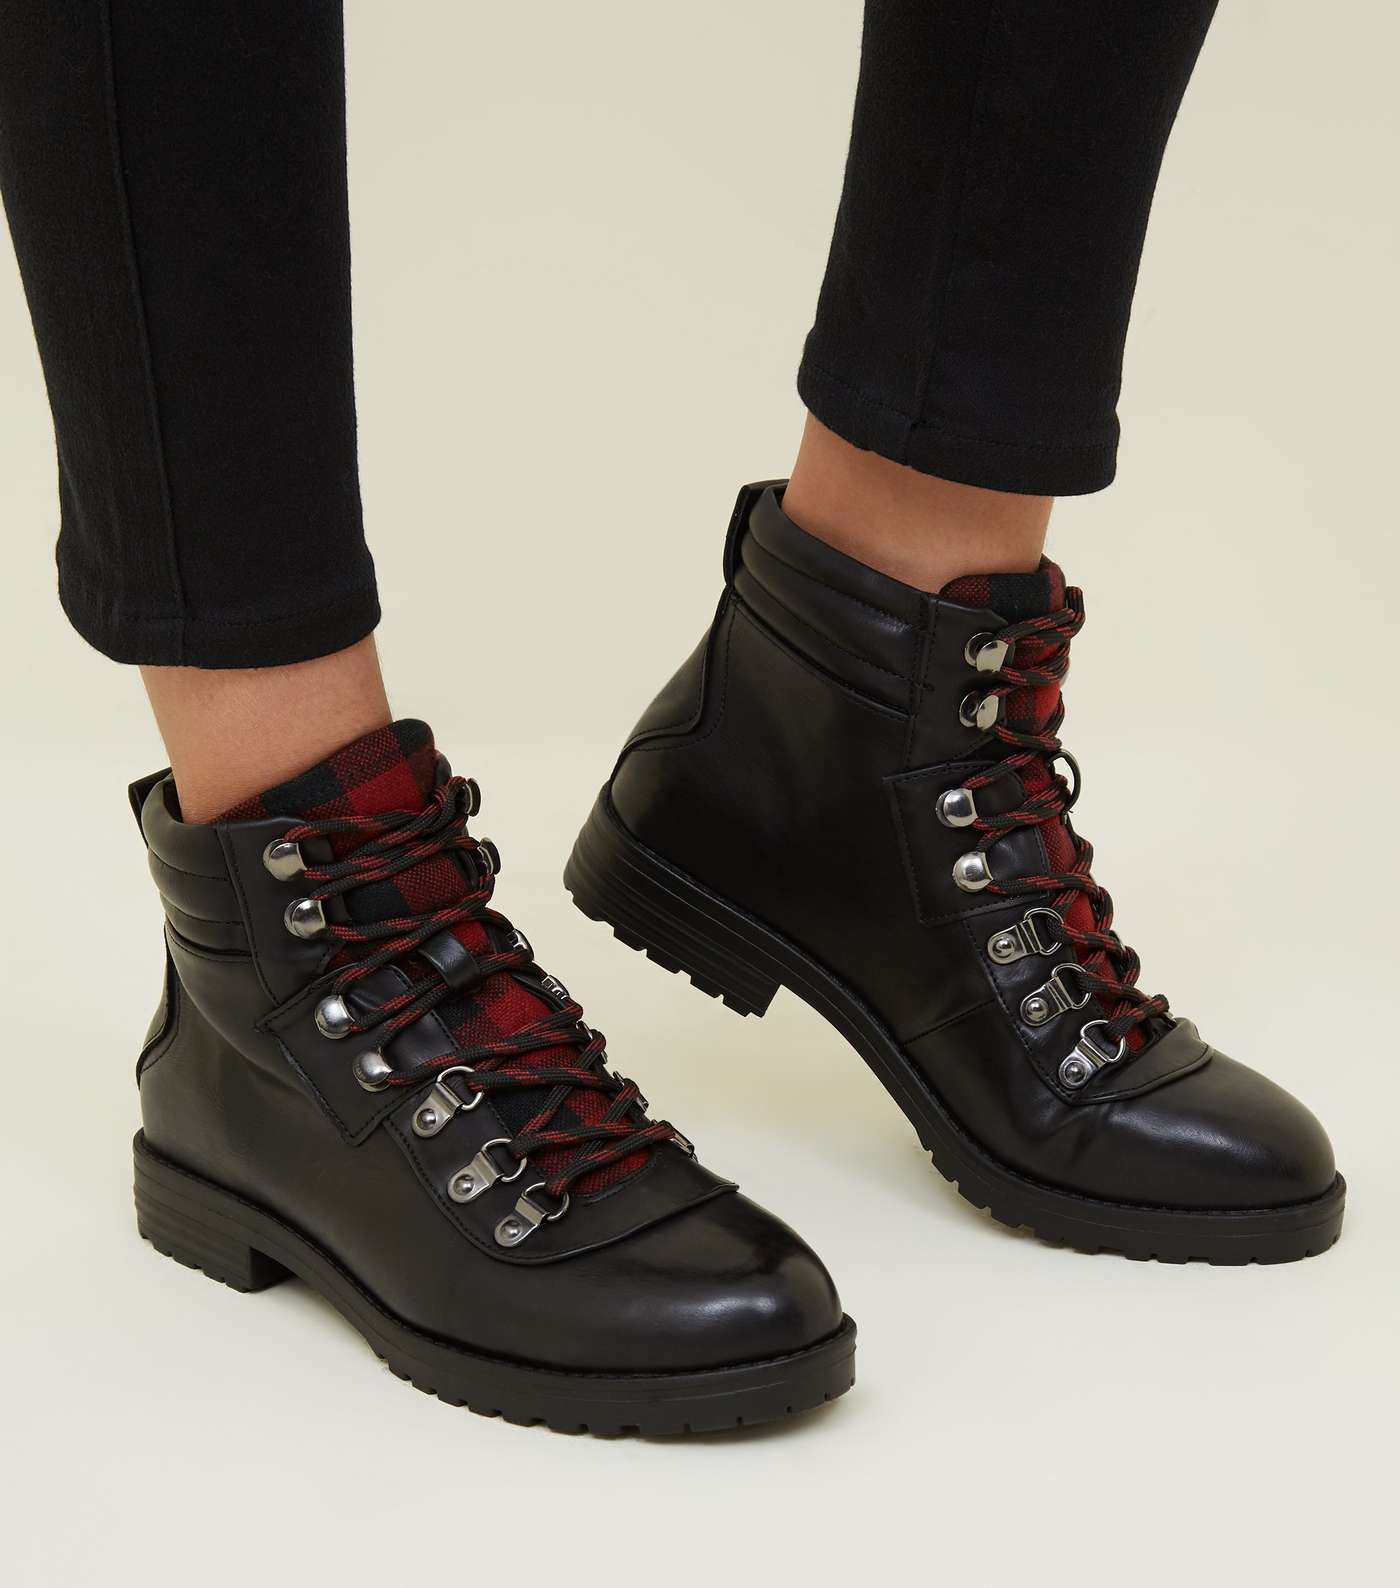 Girls Black Leather-Look Lace Up Boots Image 2